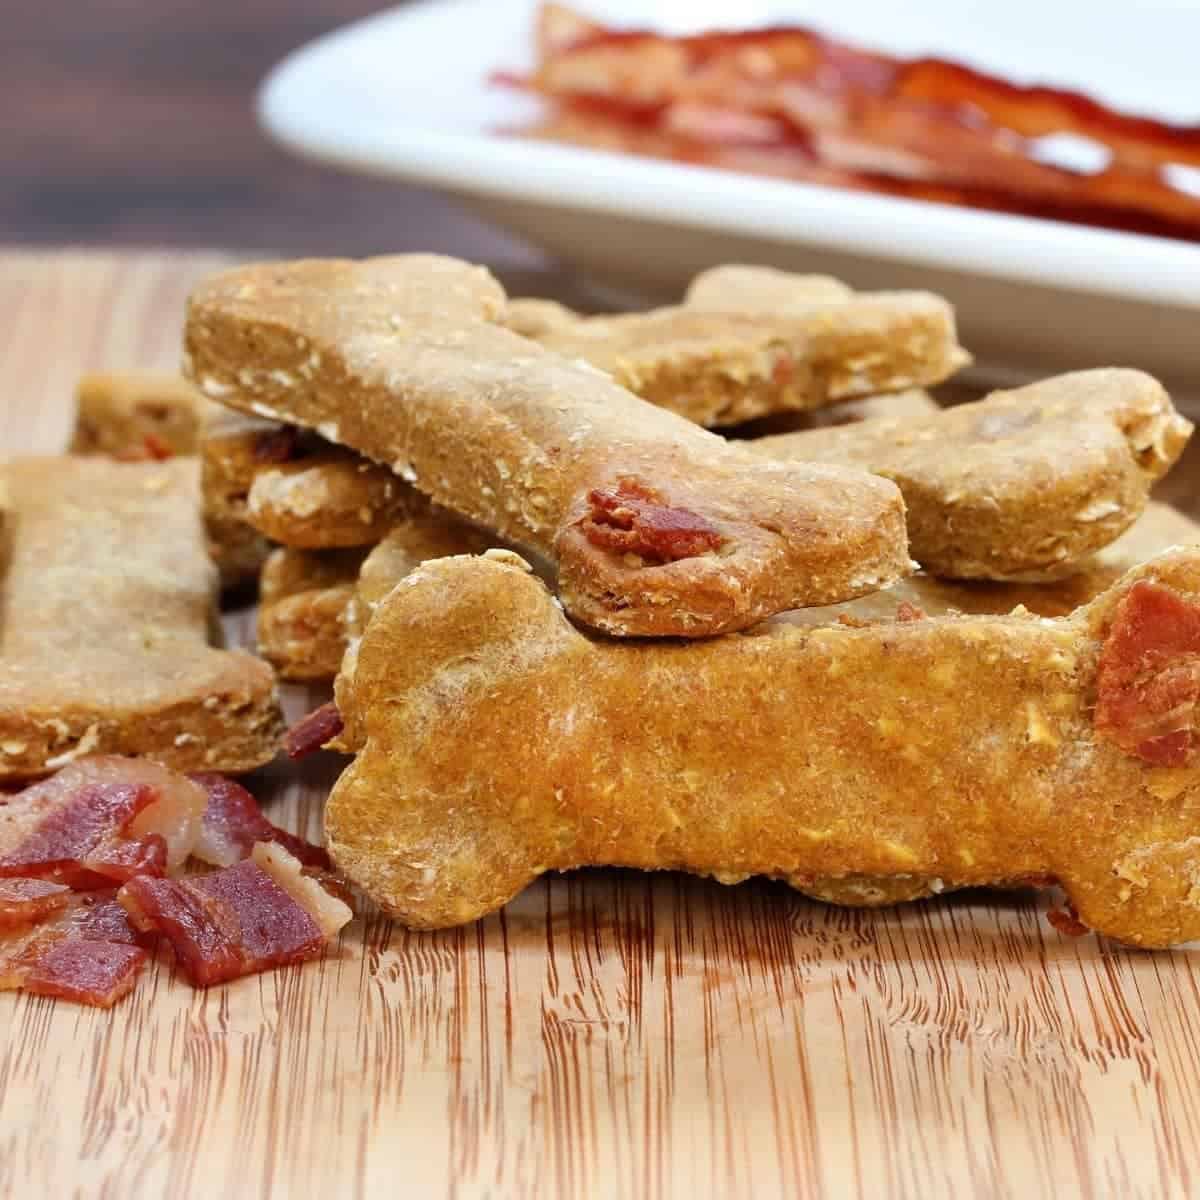 Callie's Peanut Butter Bacon Dog Biscuits